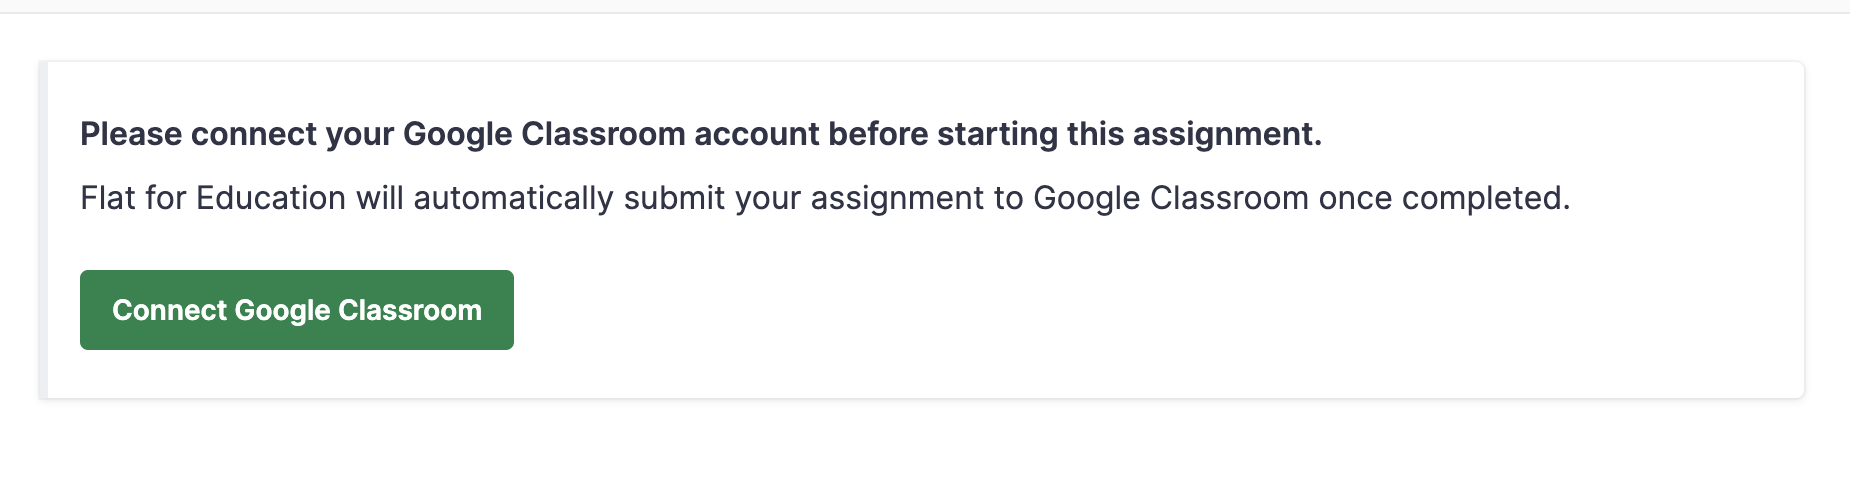 Error message preview: "Please connect your Google Classroom assignment before starting this assignment"